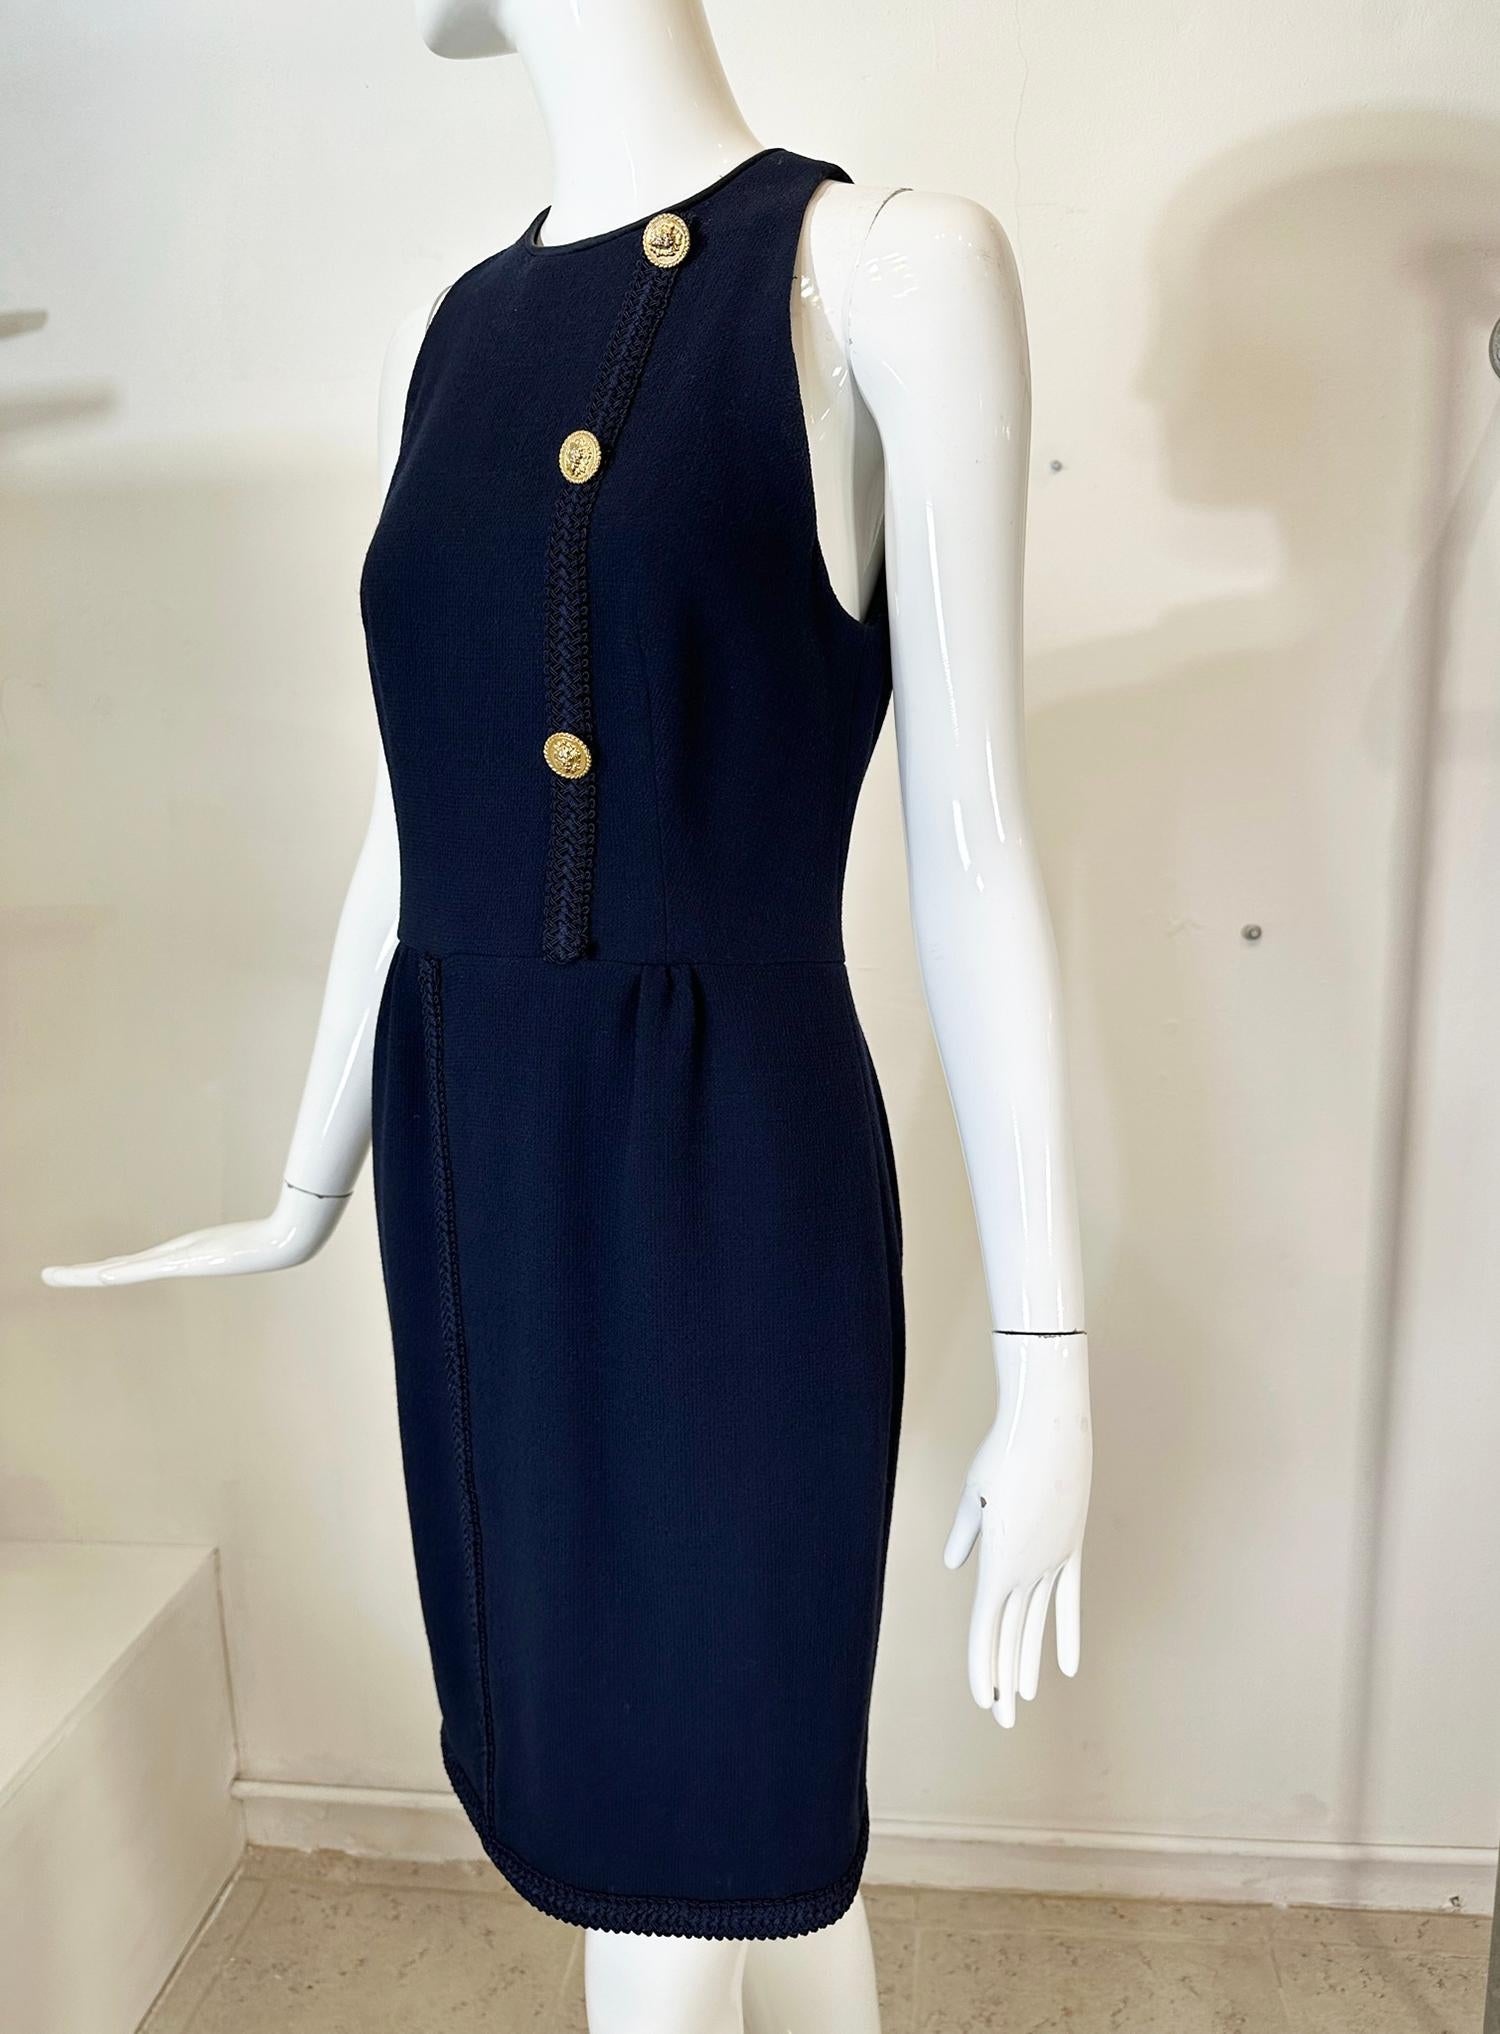 Irene Galitzine Couture navy blue wool racer neck, fitted sheath, braid trim dress. Navy blue wool dress has cut in shoulders with a round neck, the dress is fitted through the bodice, with a vertical navy blue decorative braid down the side, there